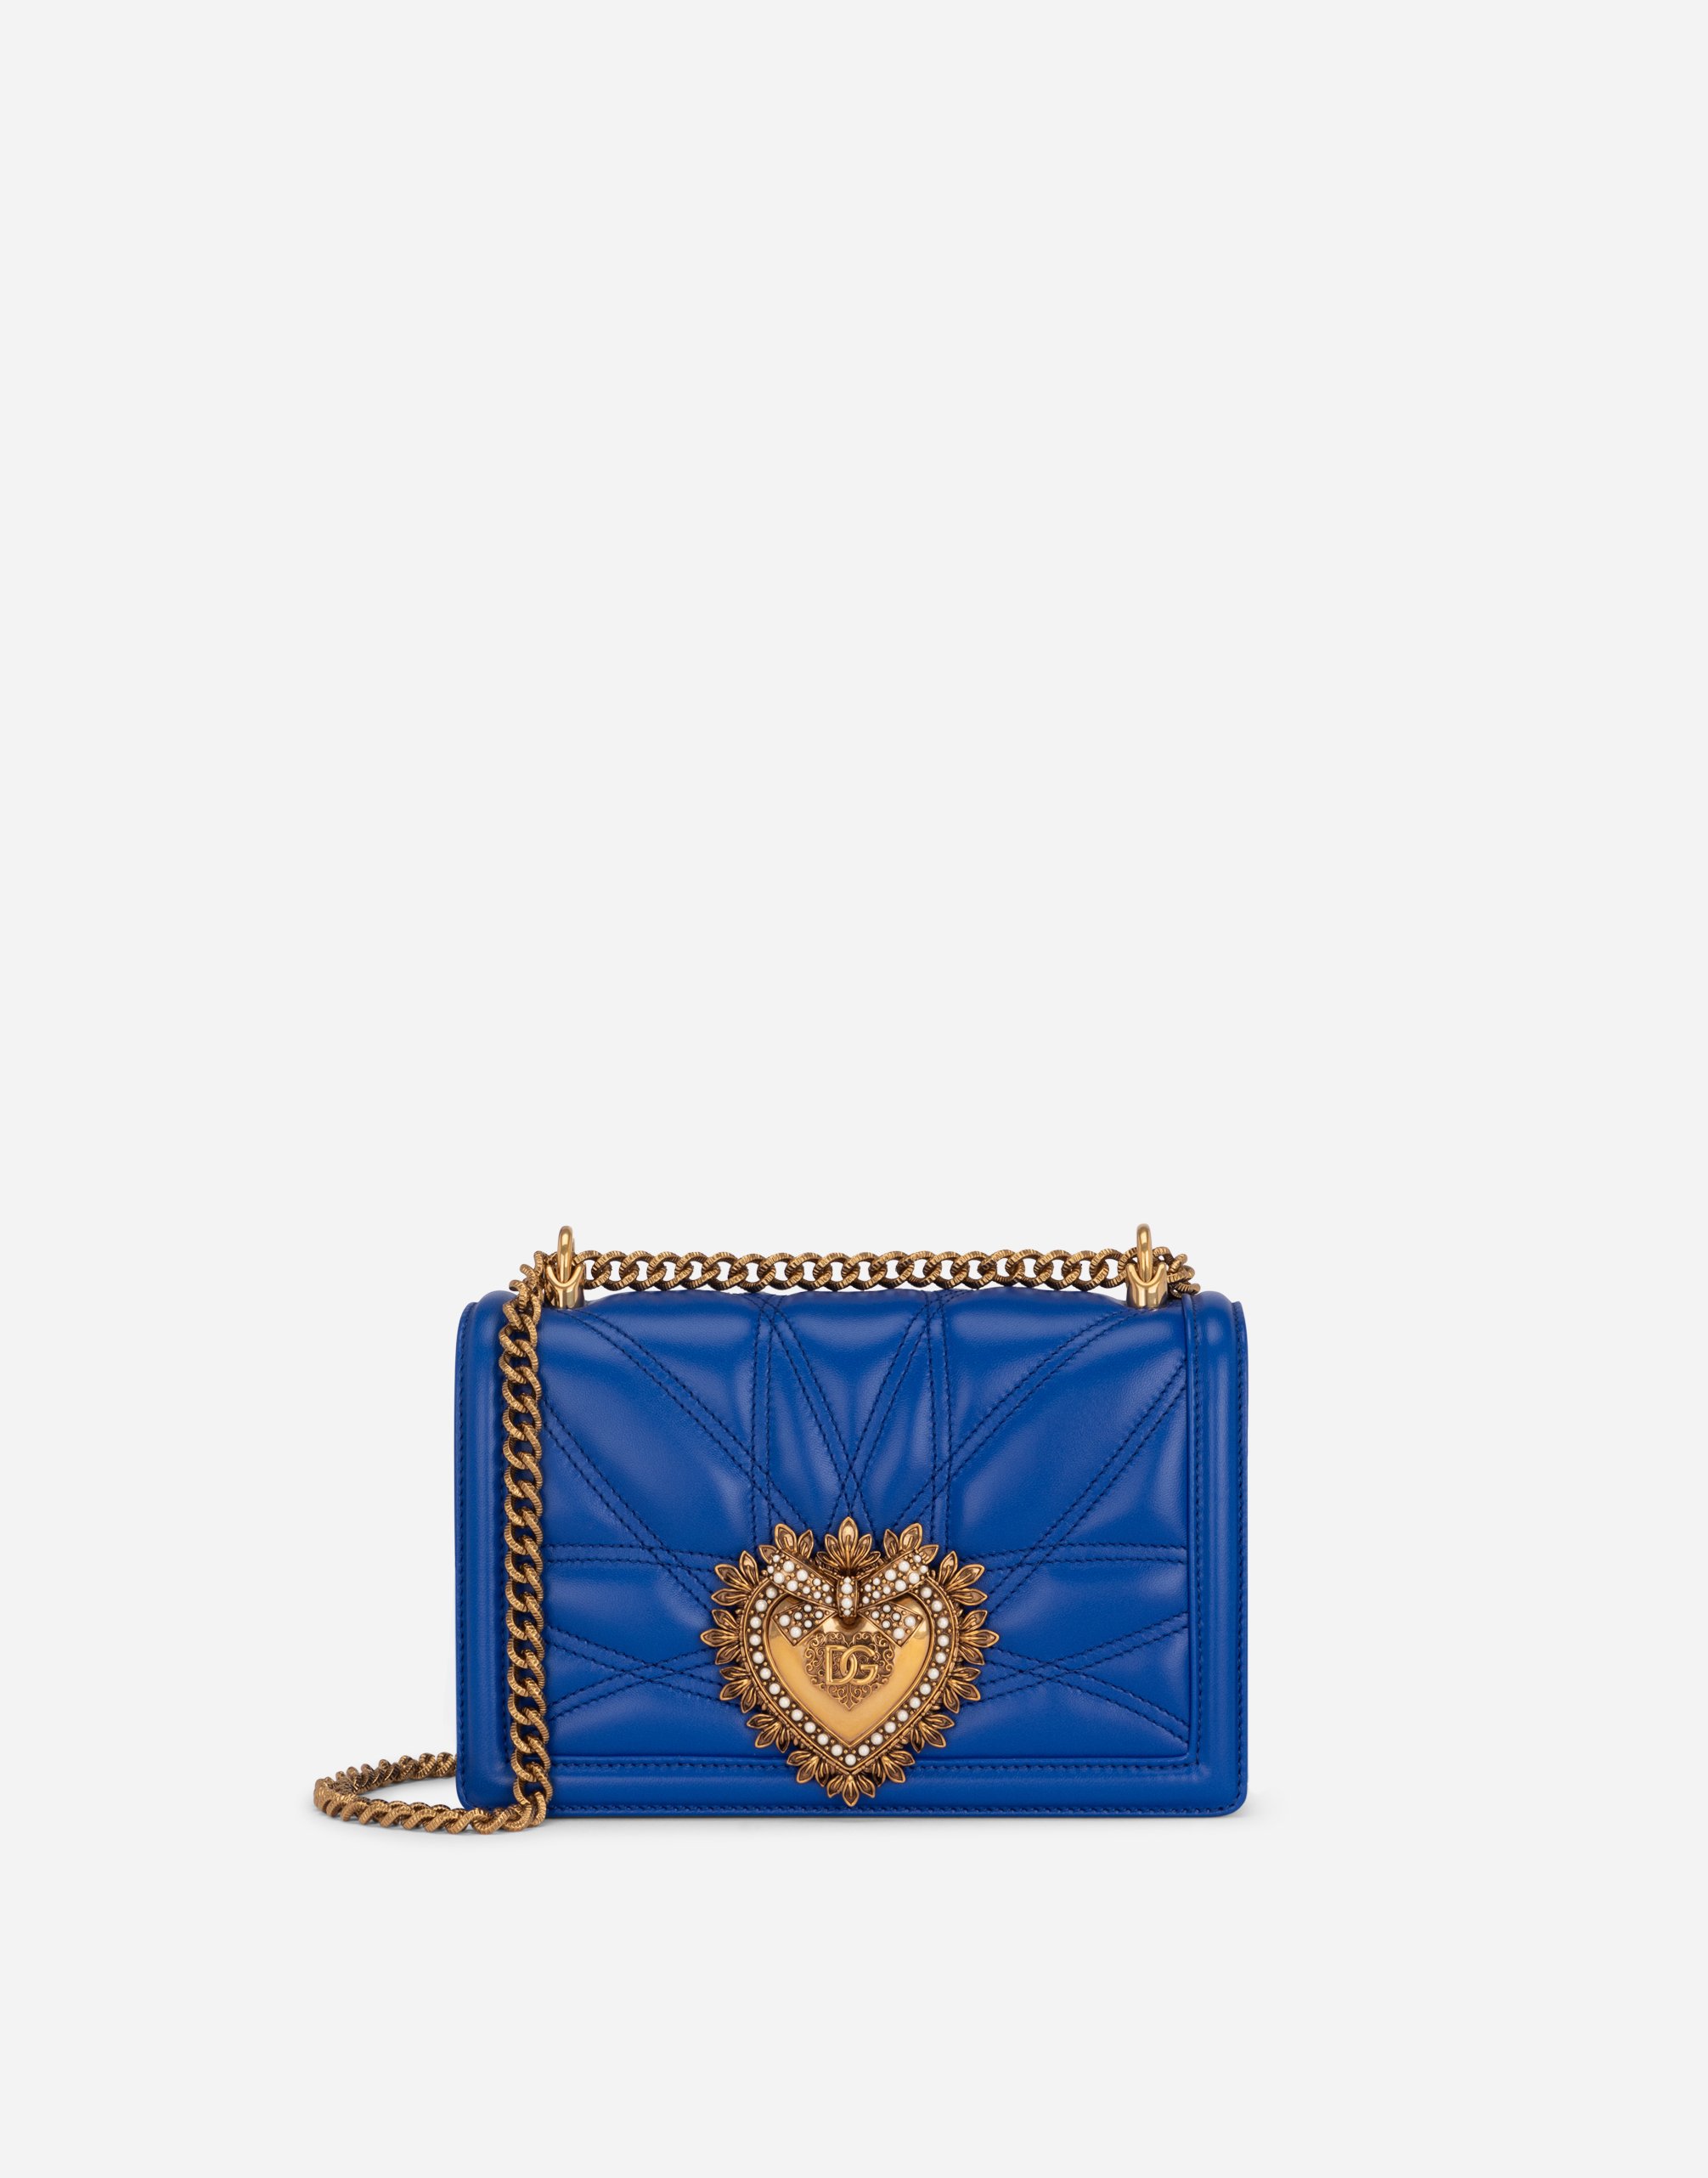 Medium Devotion bag in quilted nappa leather in Blue